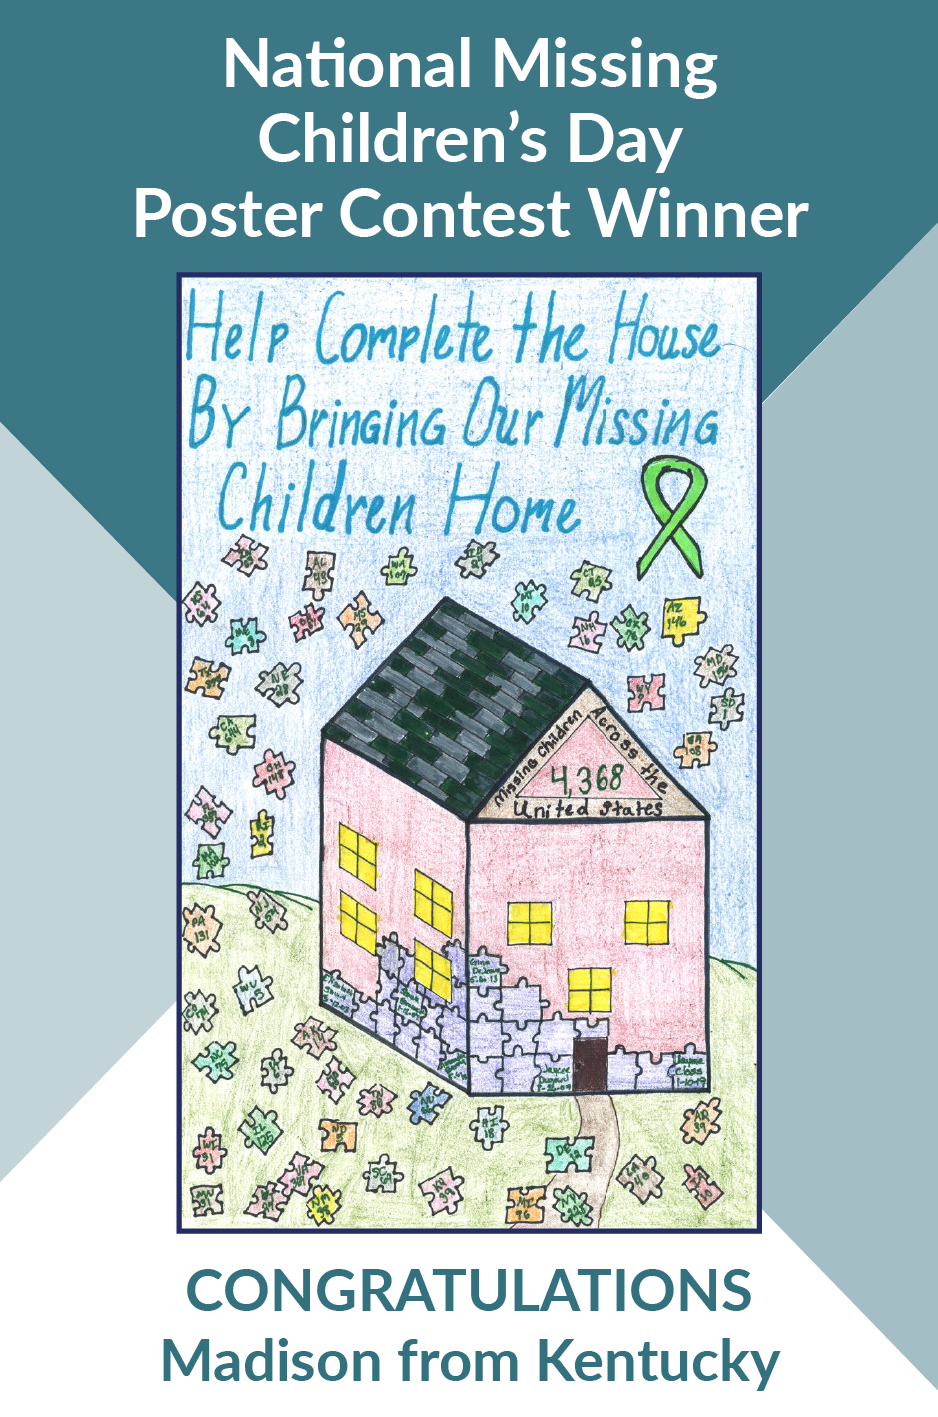 National Missing Children's Day Poster Contest Winner: Congratulations Madison from Kentucky